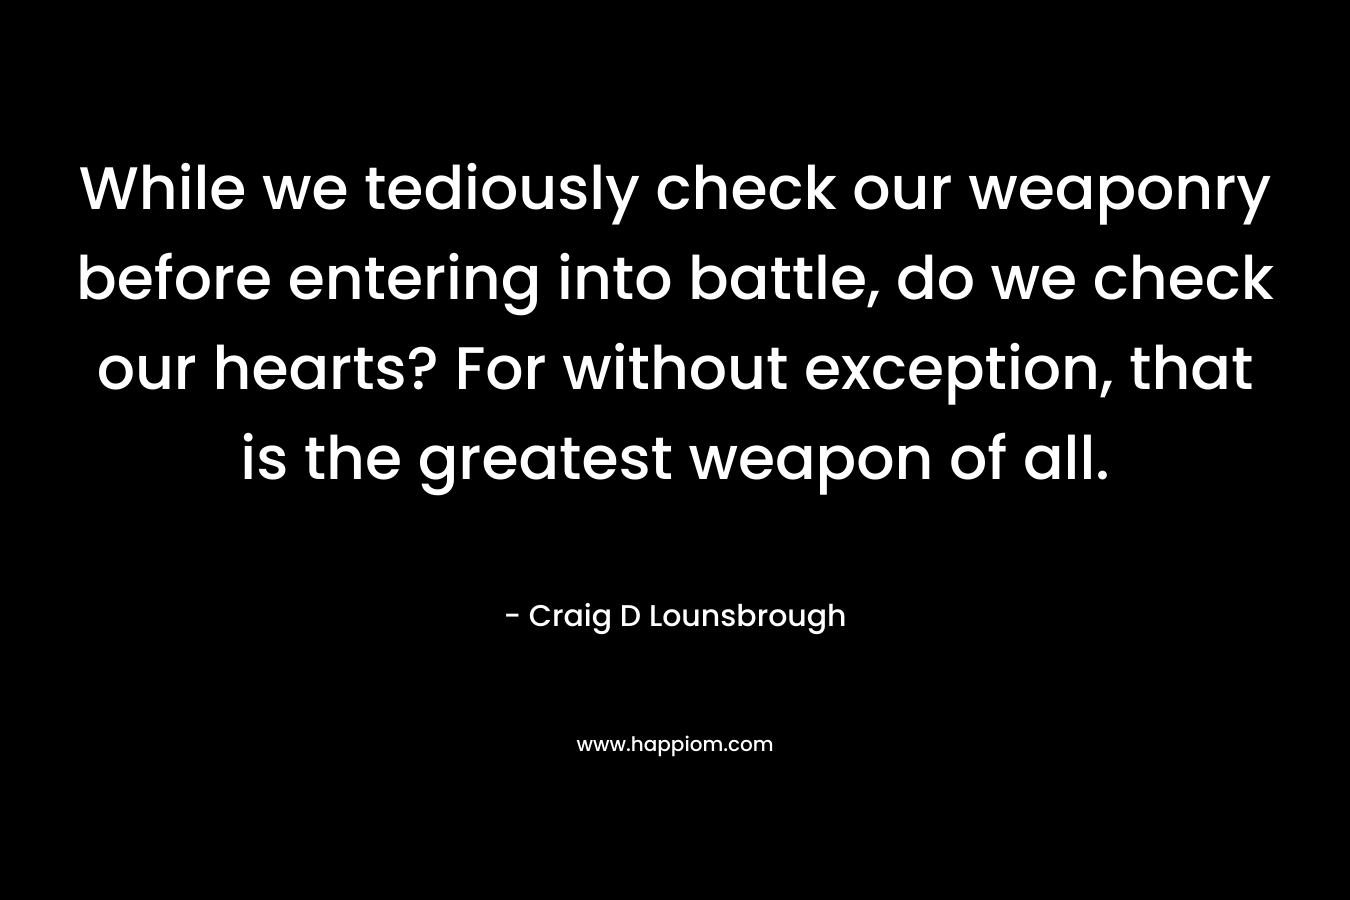 While we tediously check our weaponry before entering into battle, do we check our hearts? For without exception, that is the greatest weapon of all.